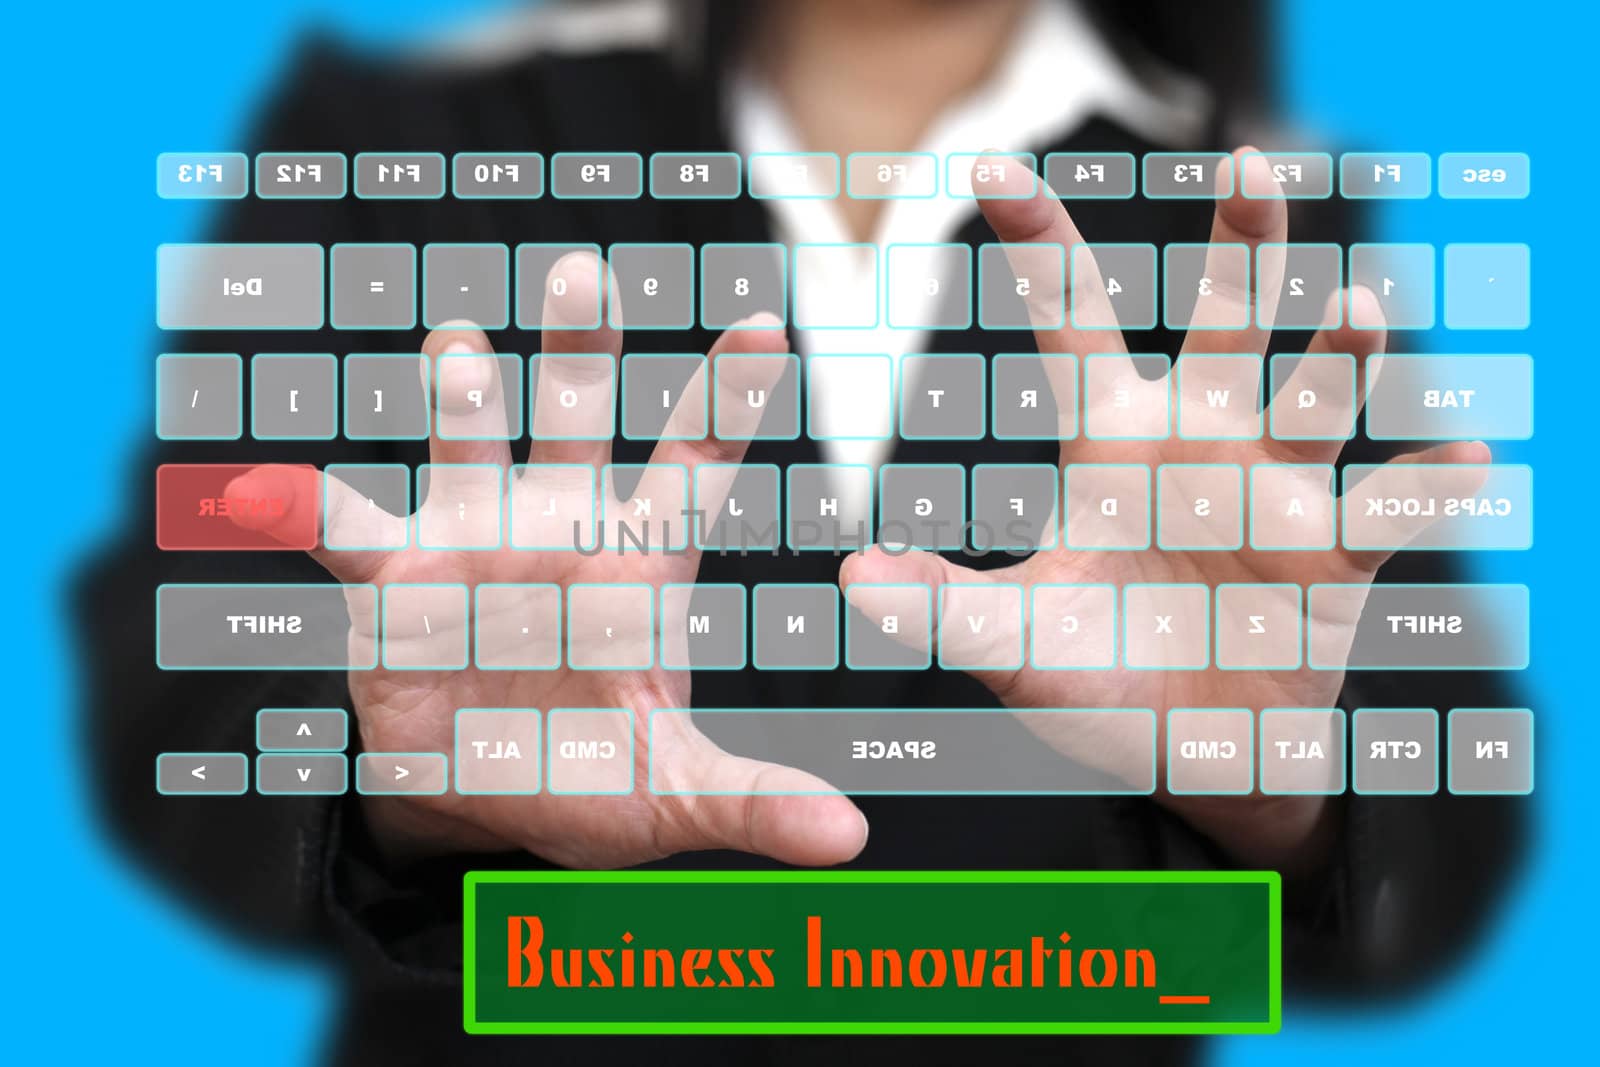 BusinessWoman typing Business Innovation on Virtual Keyboard